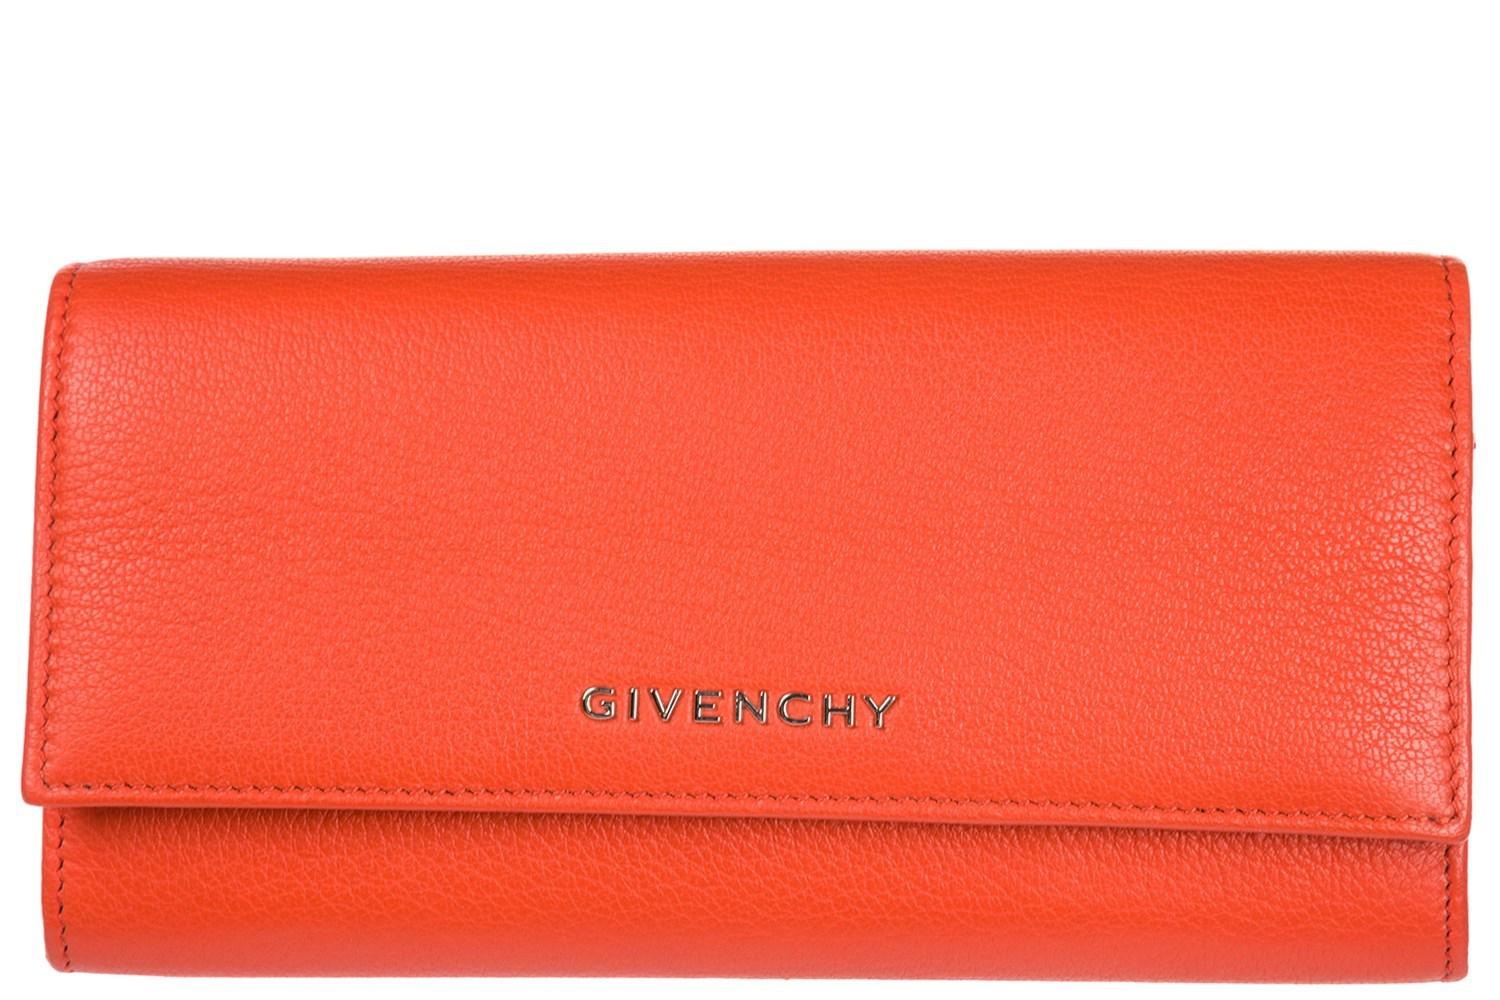 Givenchy Women&#39;s Wallet Genuine Leather Coin Case Holder Purse Card Bifold Nuovo Pandora in ...